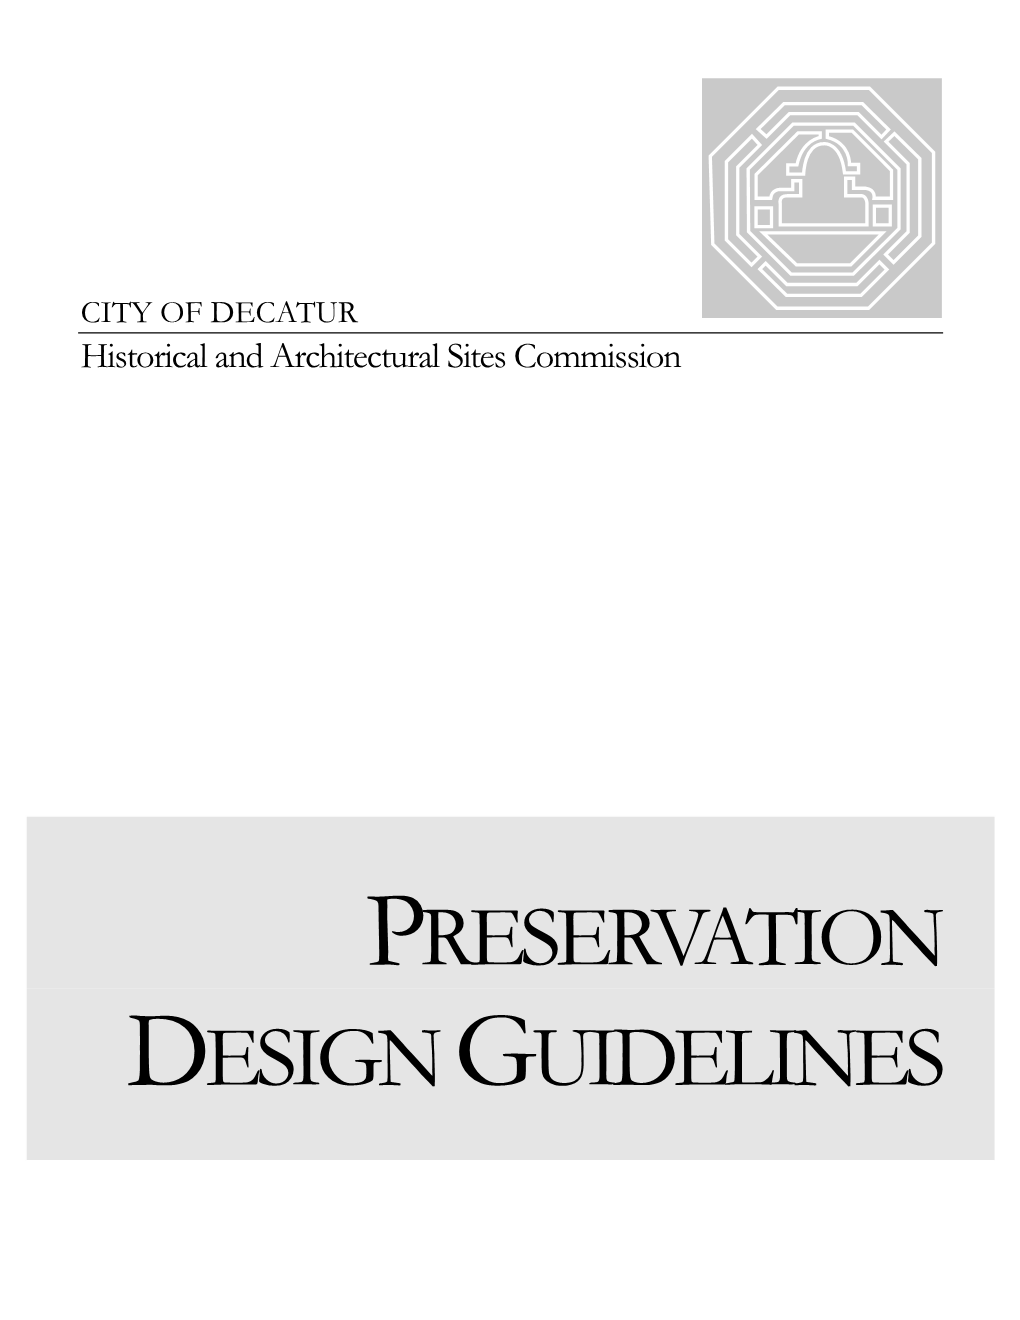 PRESERVATION DESIGN GUIDELINES HISTORICAL and ARCHITECTURAL SITES COMMISSION Preservation Design Guidelines for Decatur Historic Districts and Landmarks